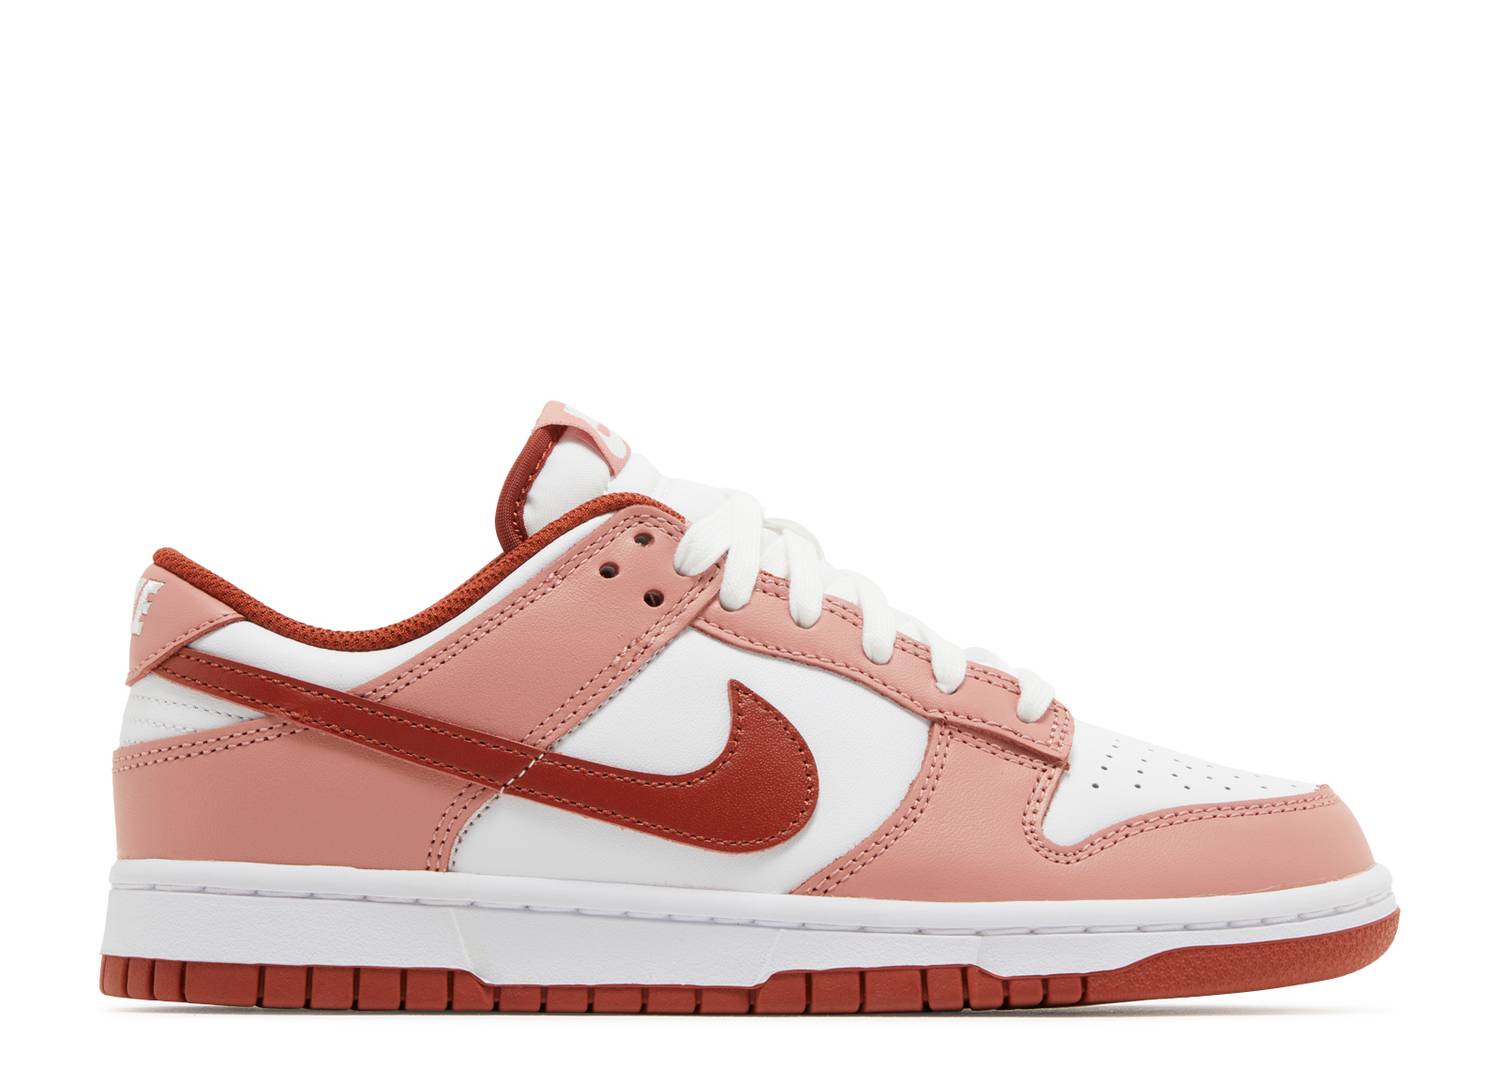 NIKE DUNK LOW “RED STAR DUST”